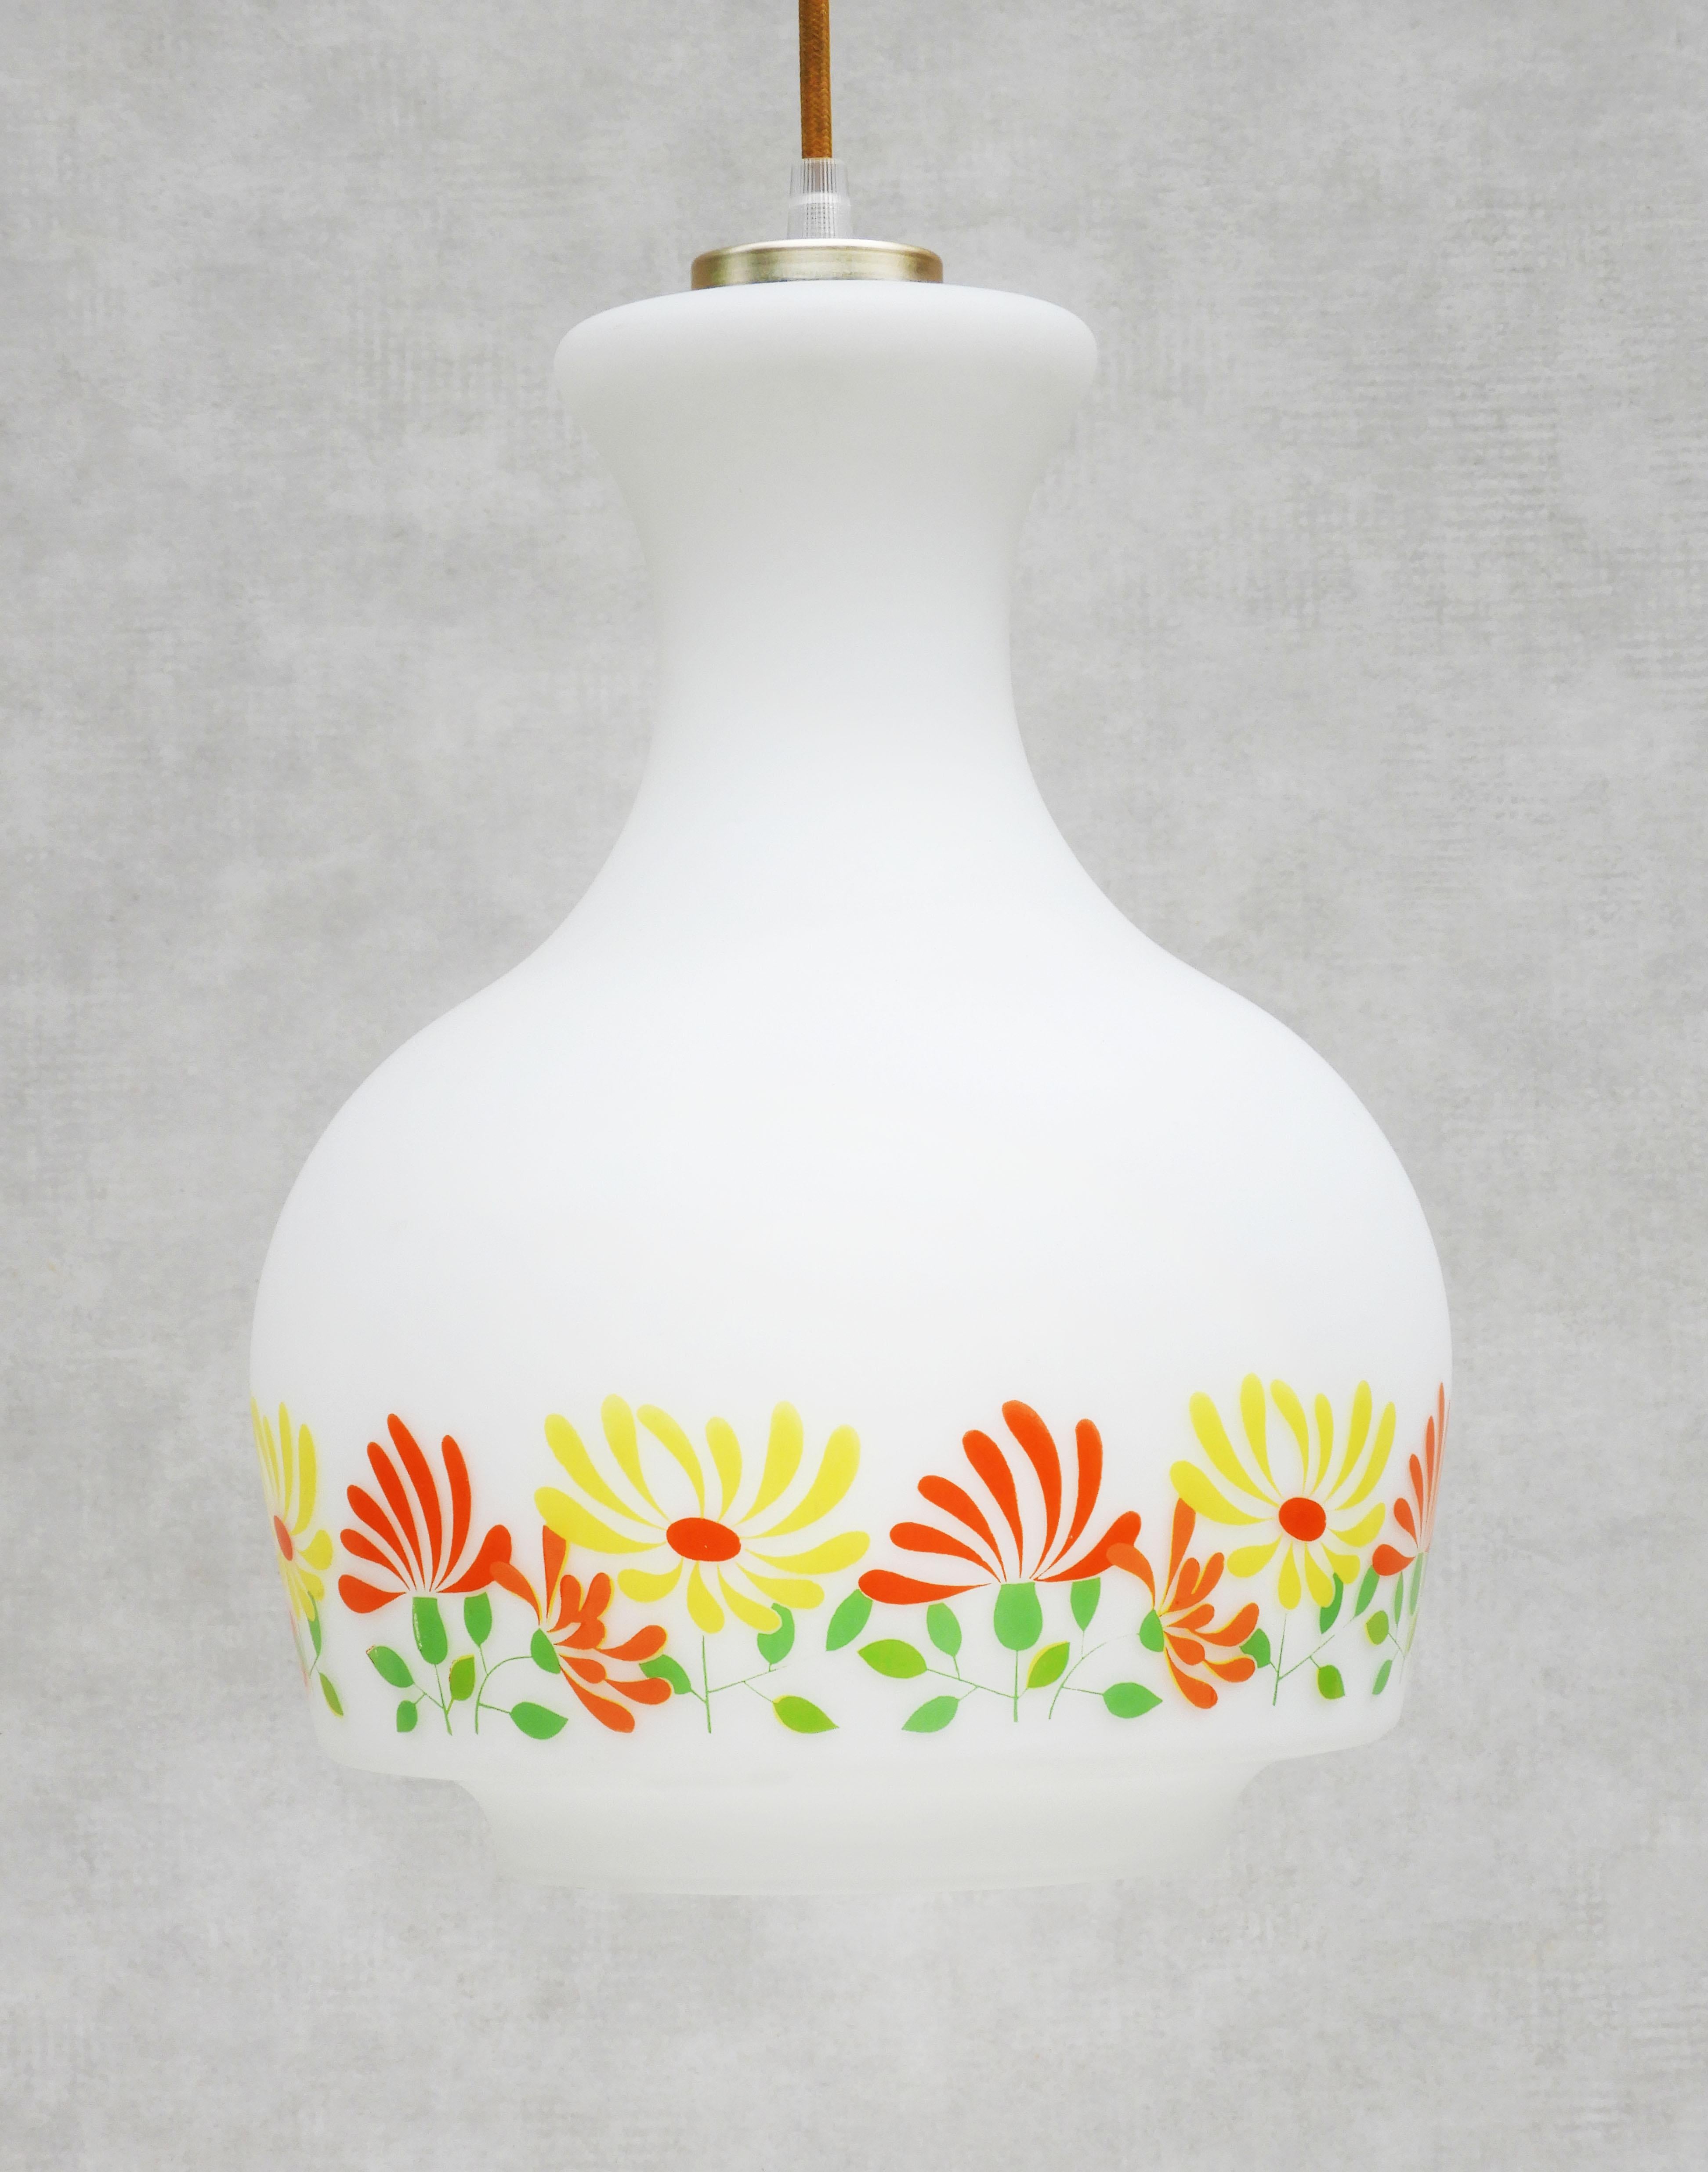 French opaline ceiling light from 70s France. Charming flower frieze adorns the satin finish opaline glass, giving off a wonderful diffused light when lit.  In excellent vintage condition with no losses to glass. Rewired with all new electrical